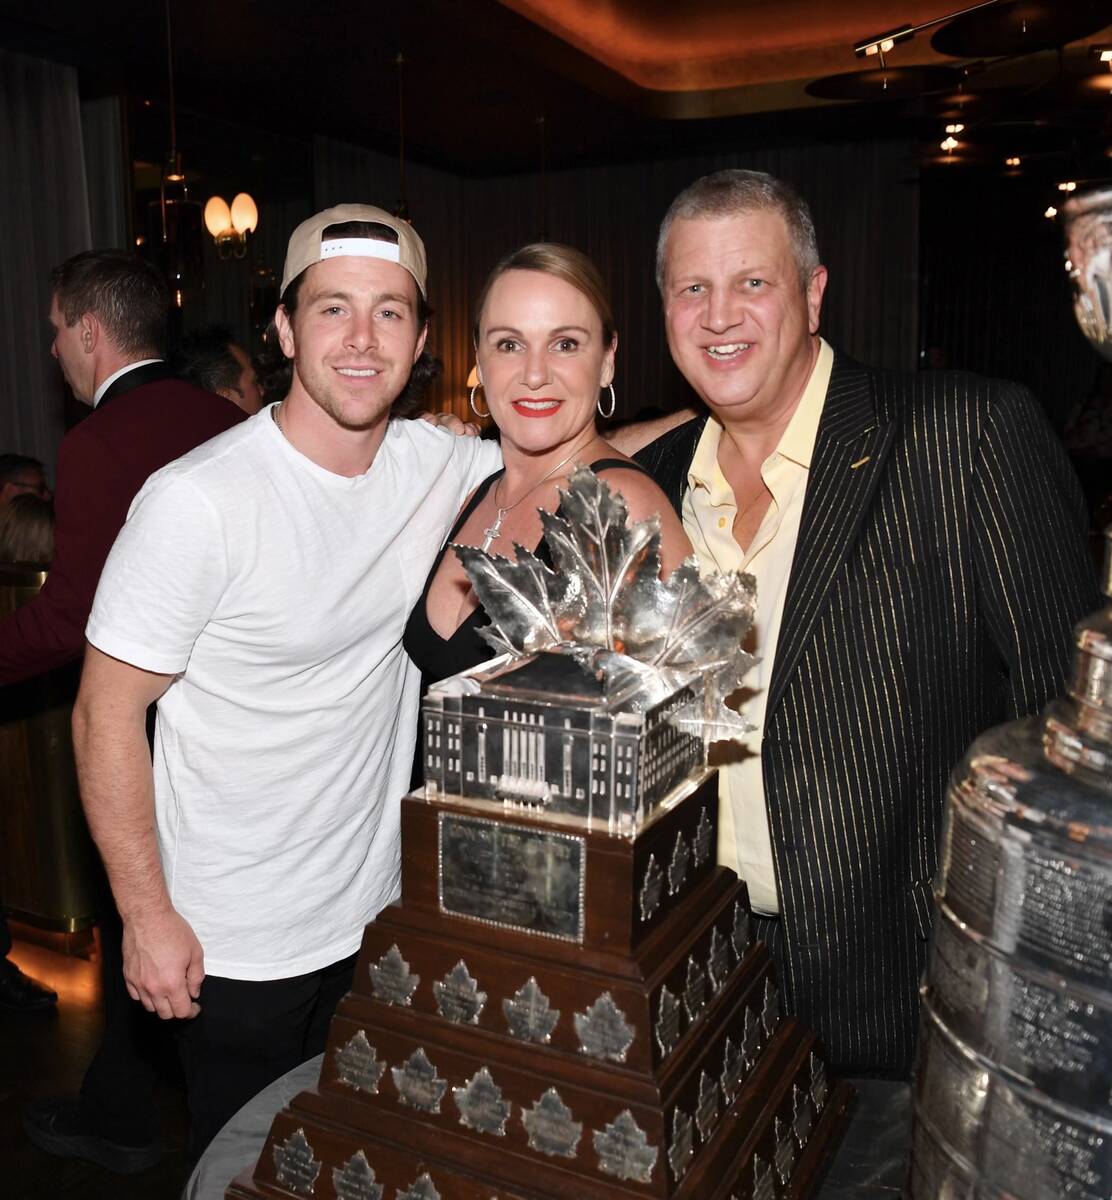 Golden-Knight Jonathan Marchessault is shown with Circa co-owner Derek Stevens and his wife, Ni ...